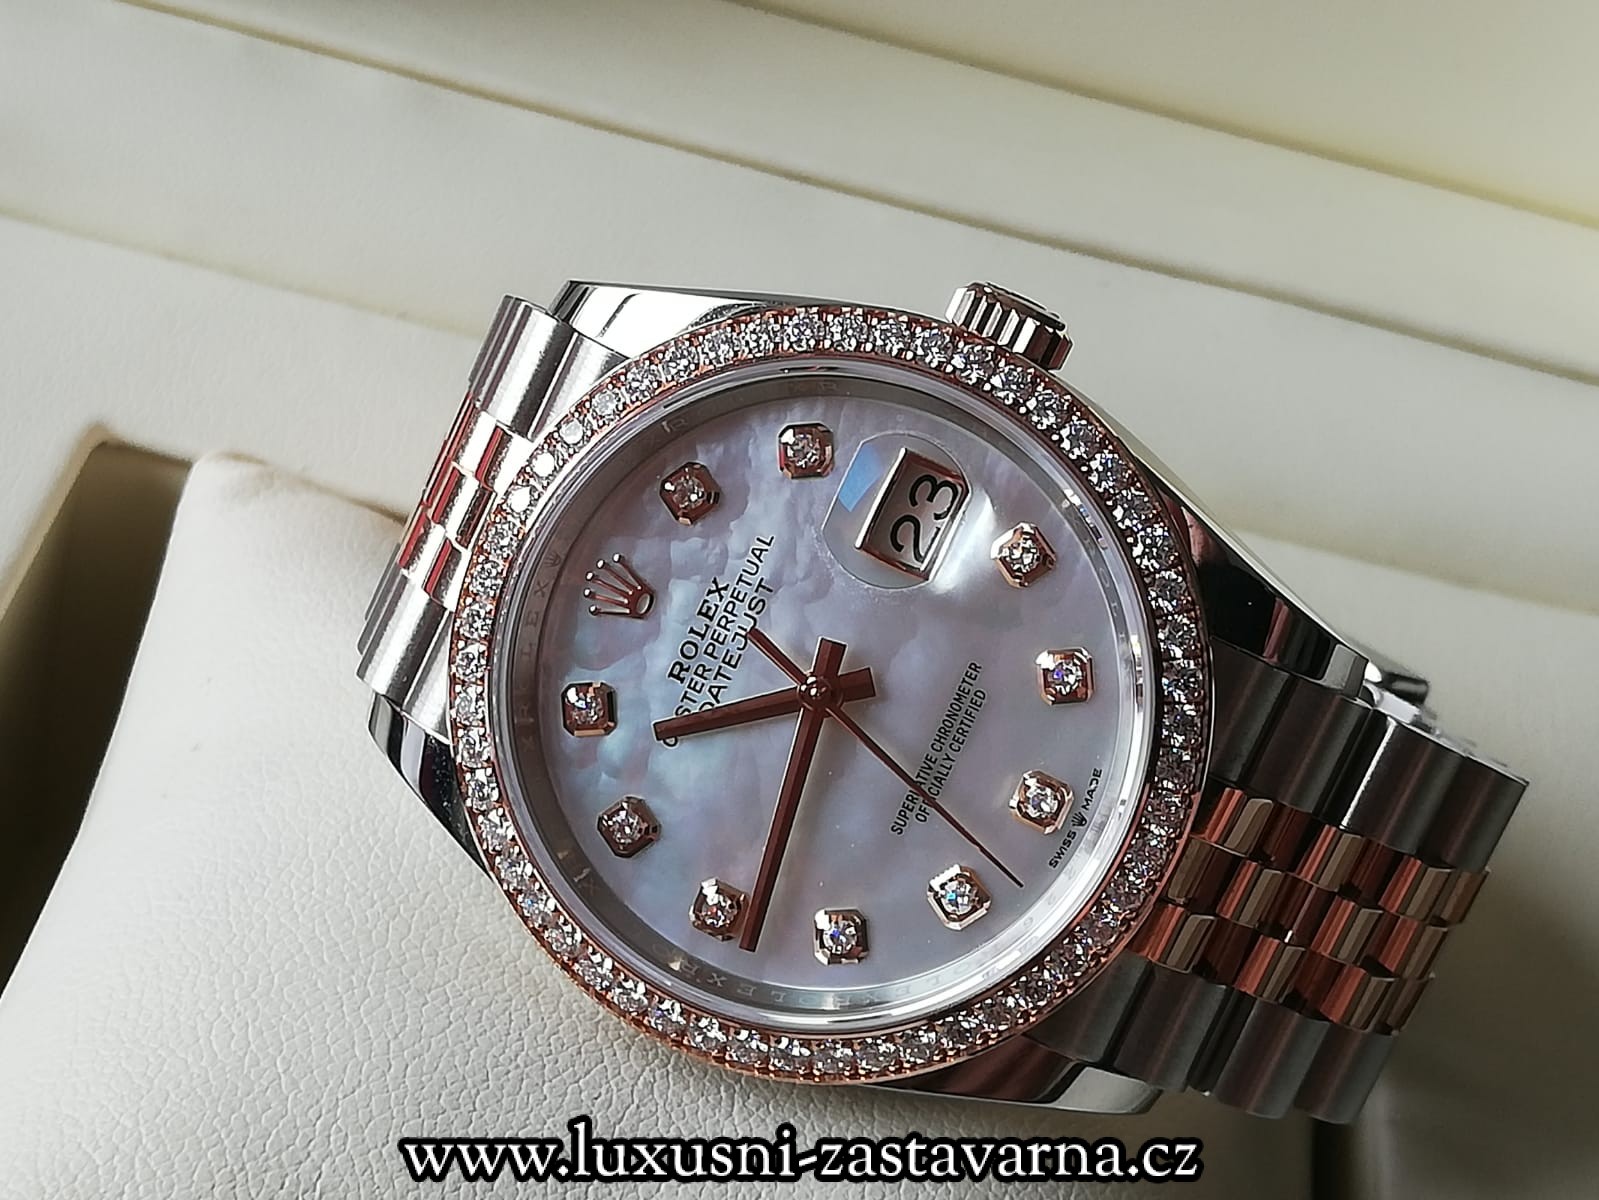 Rolex_Oyster_Perpetual_Datejust_RBR_36mm_011